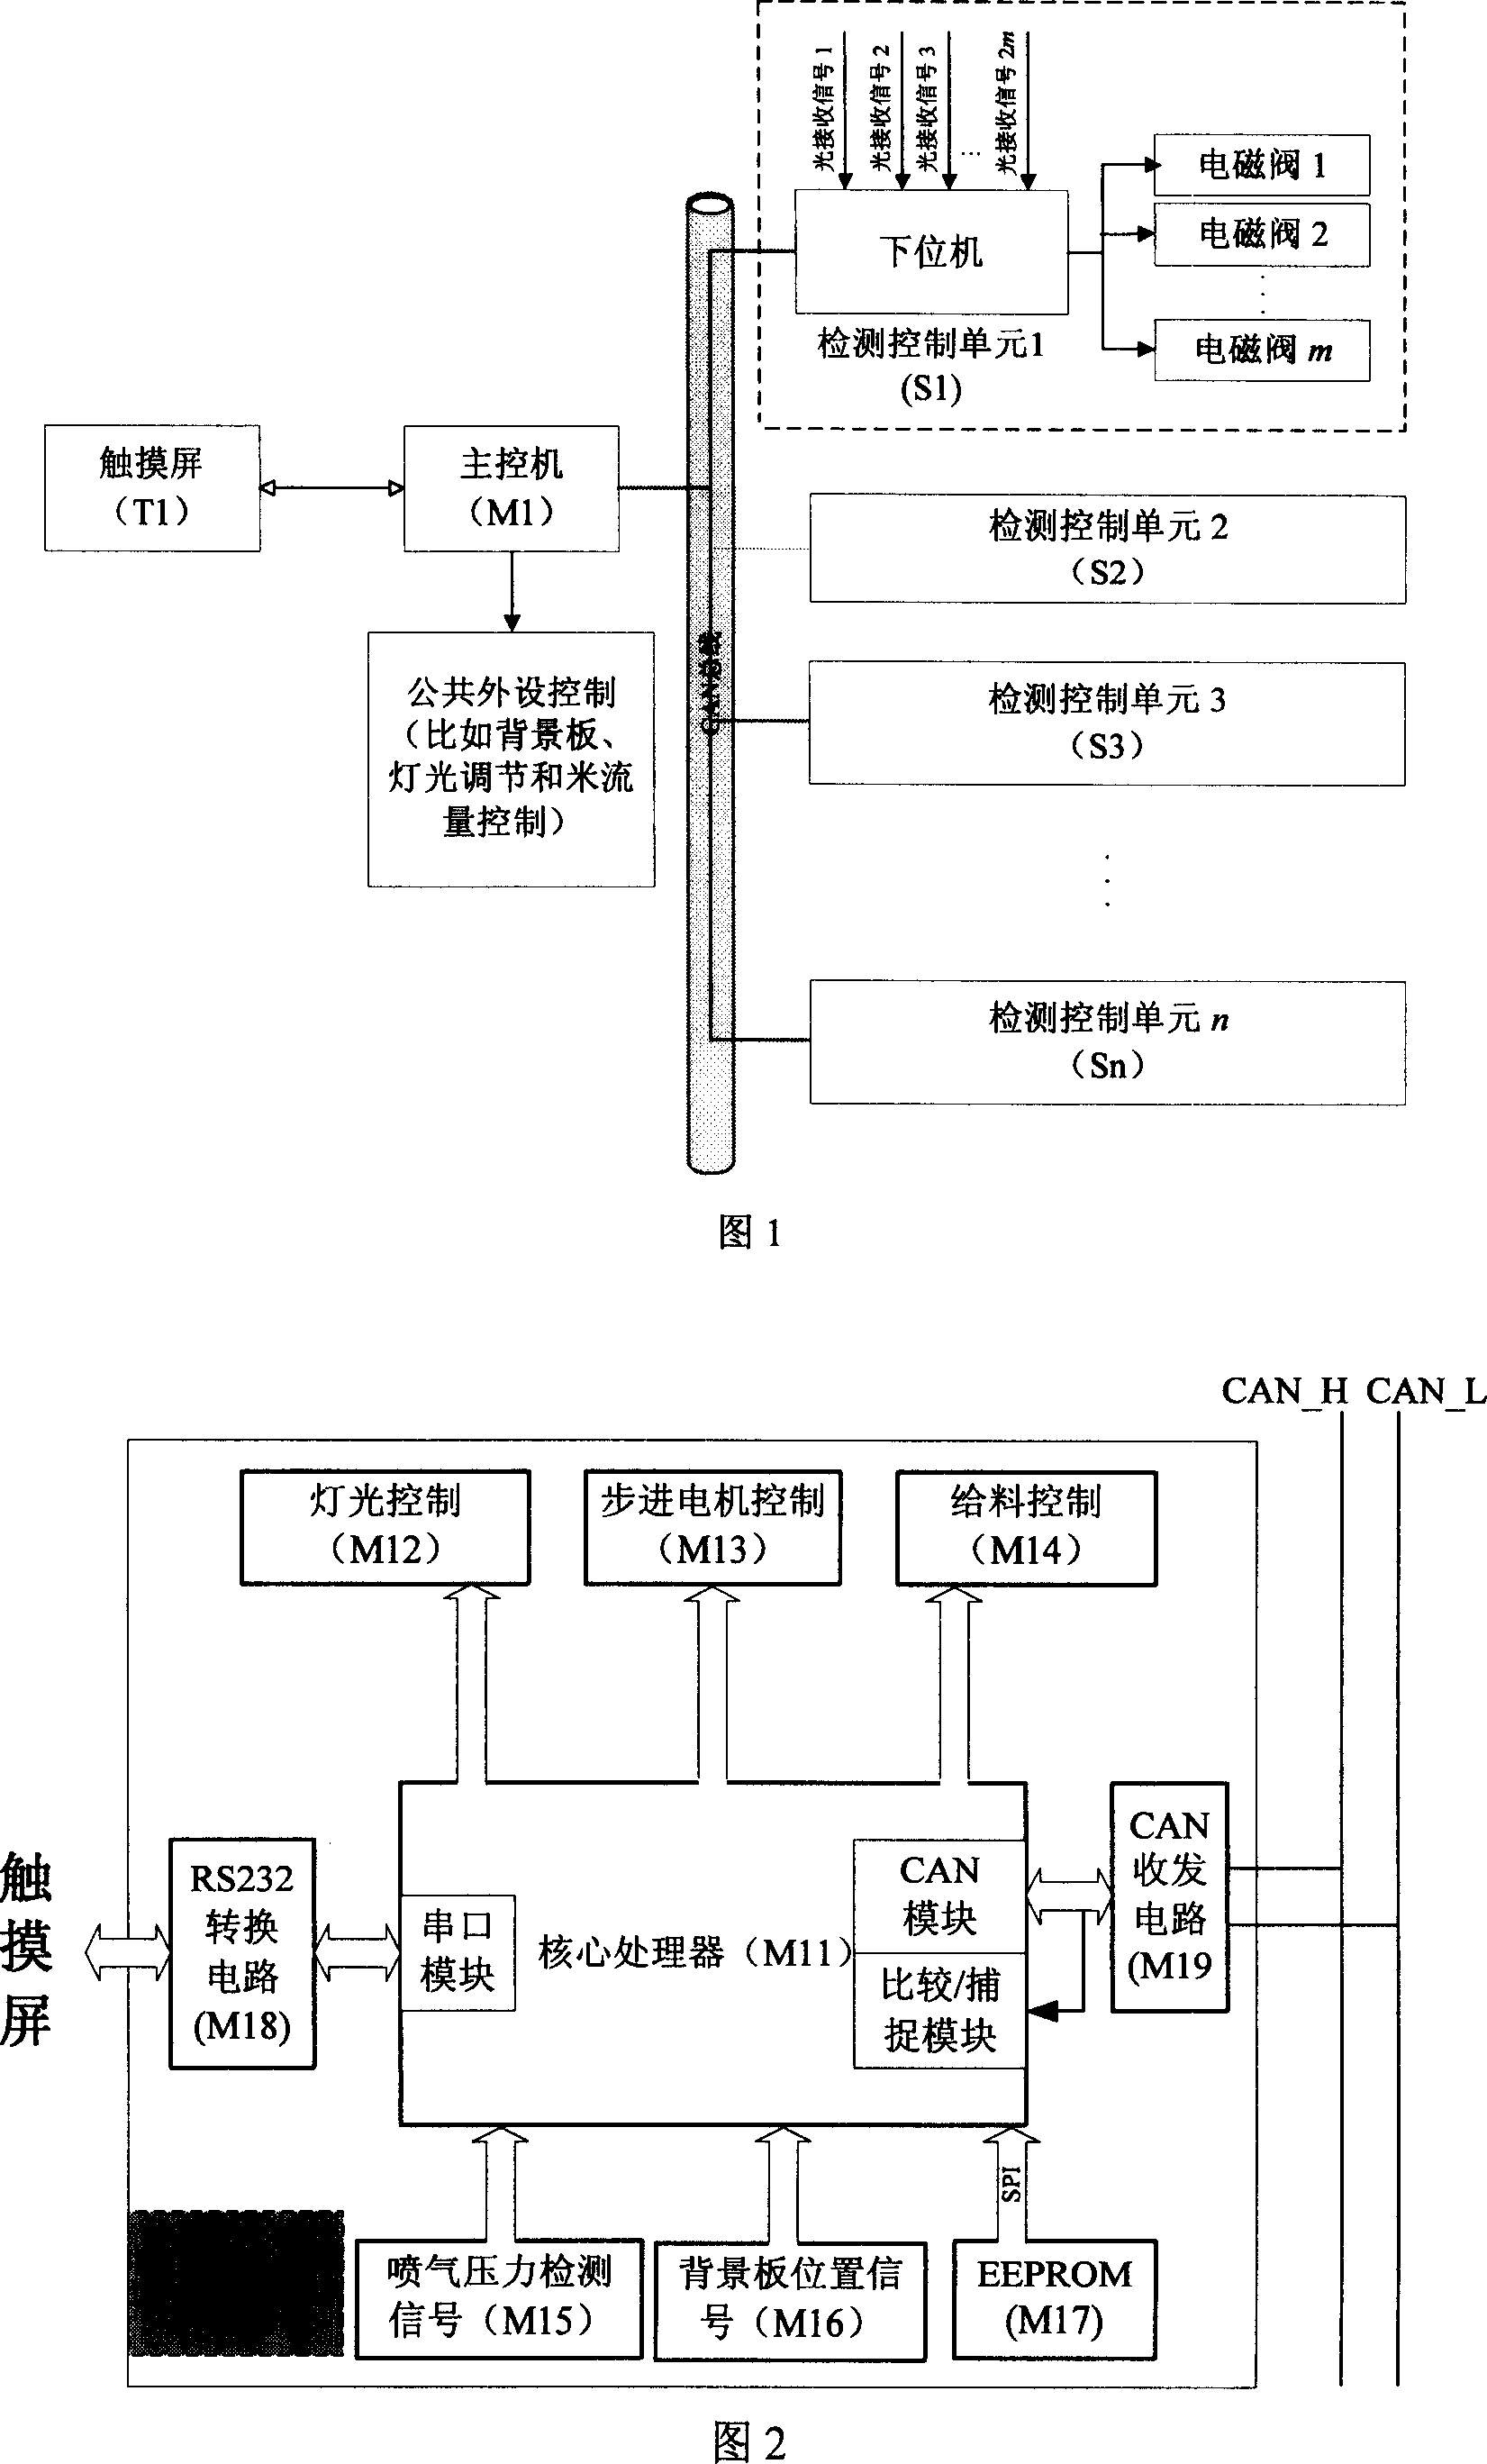 Distributed electronic control system of apparatus of selecting rice color